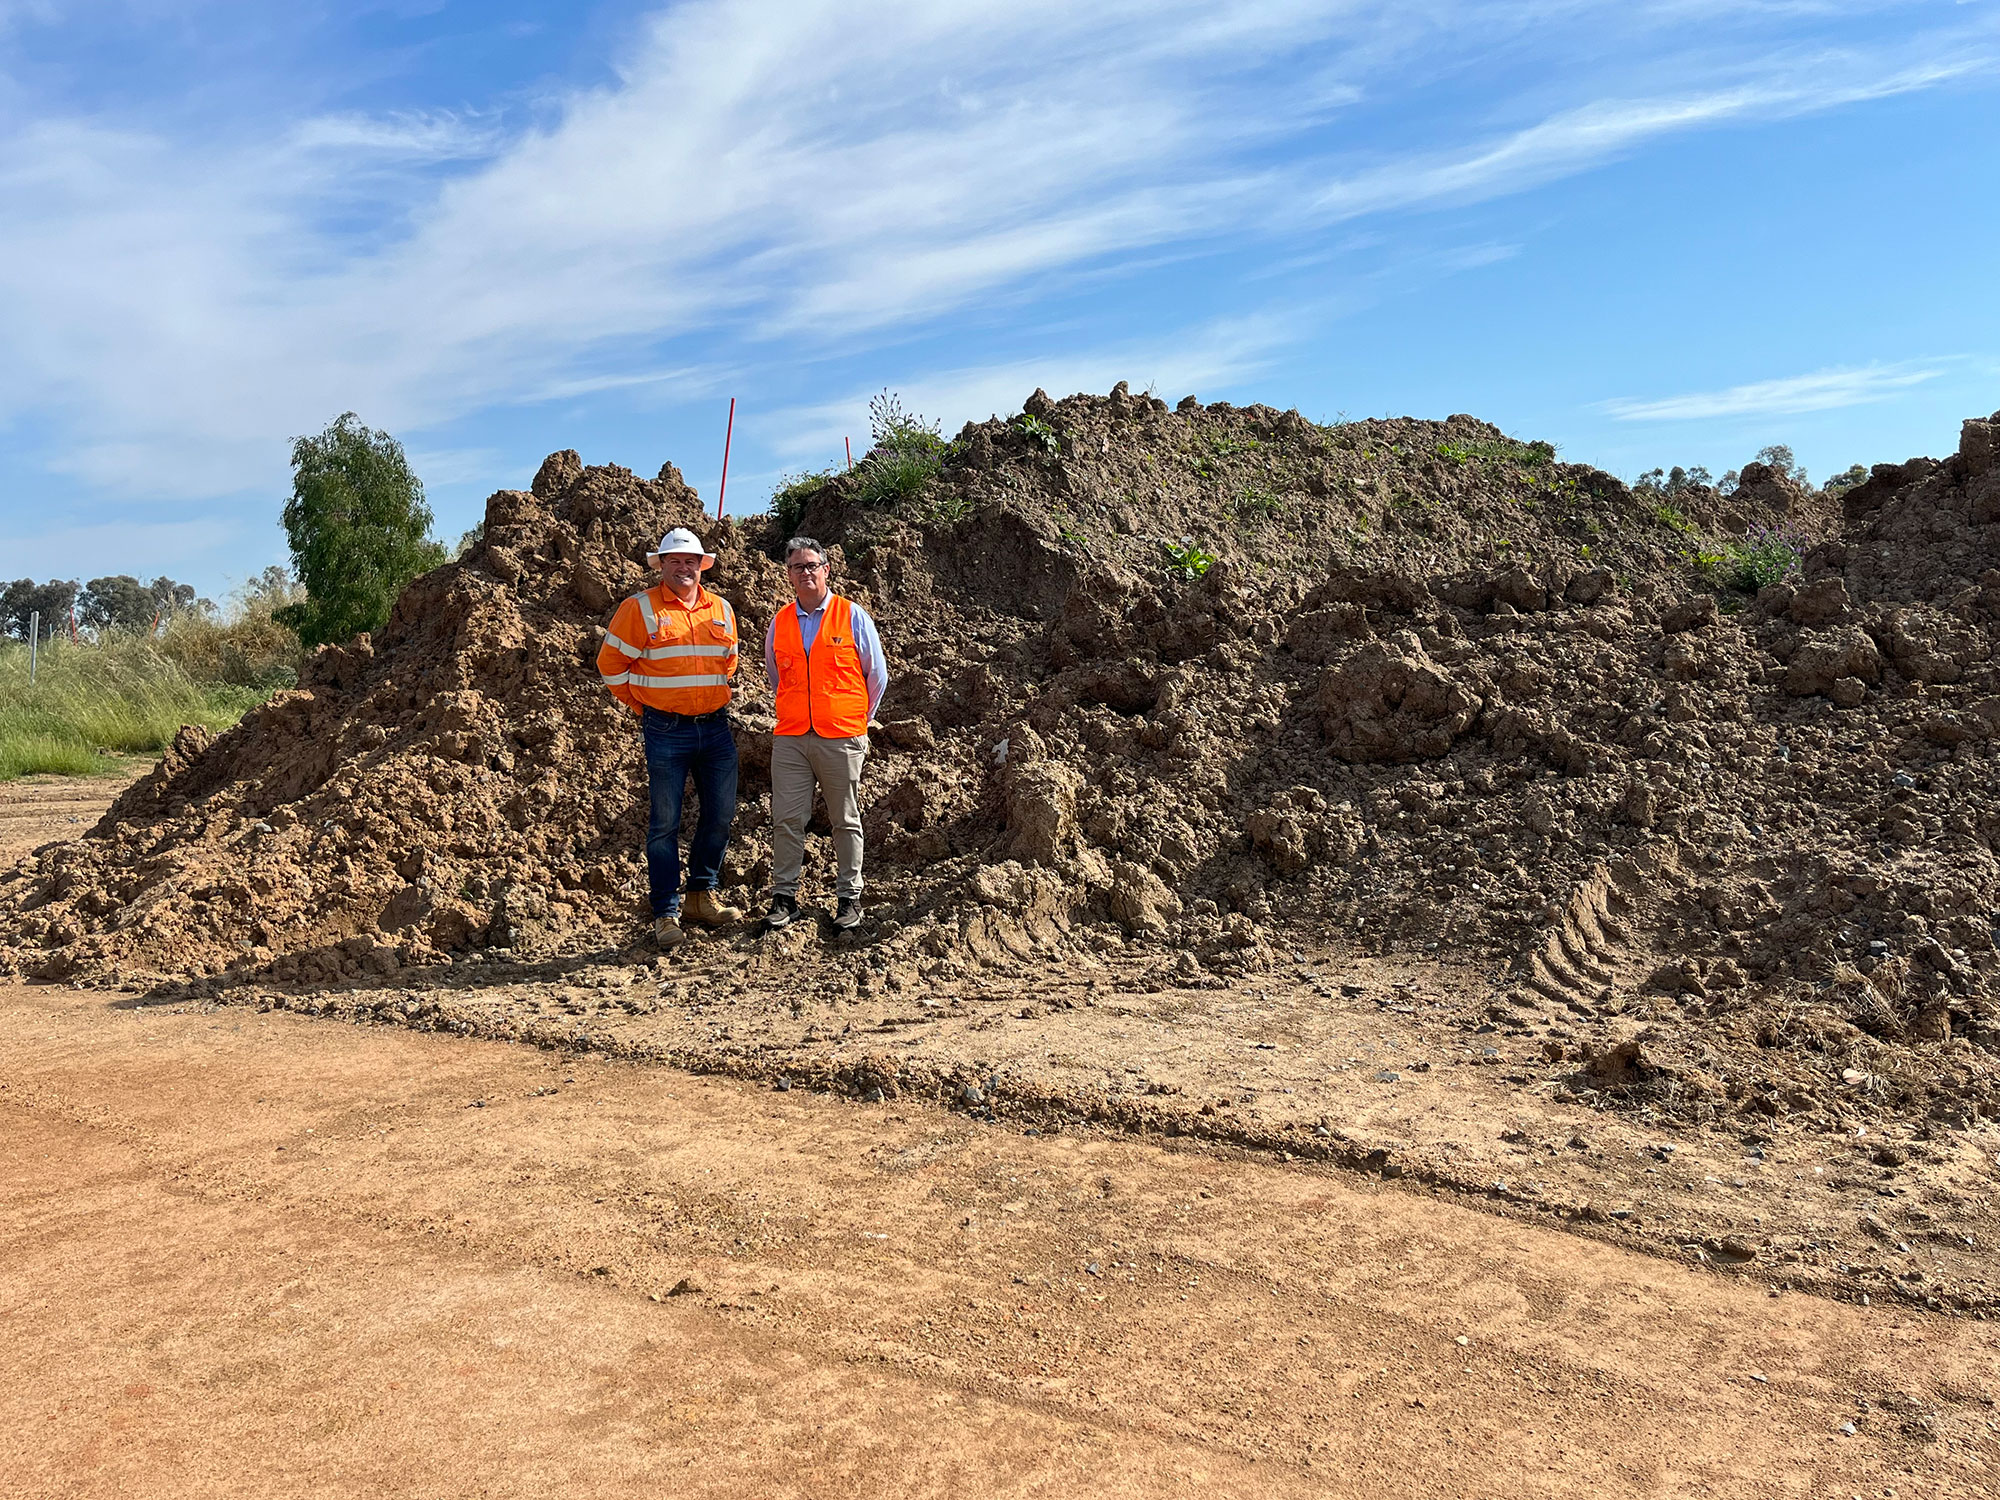 McConnell Dowell’s Ben Smith and Jason Atteridge from Wodonga TAFE at the four-wheel drive training course where thousands of tonnes of soil is being used to improve driver skills.